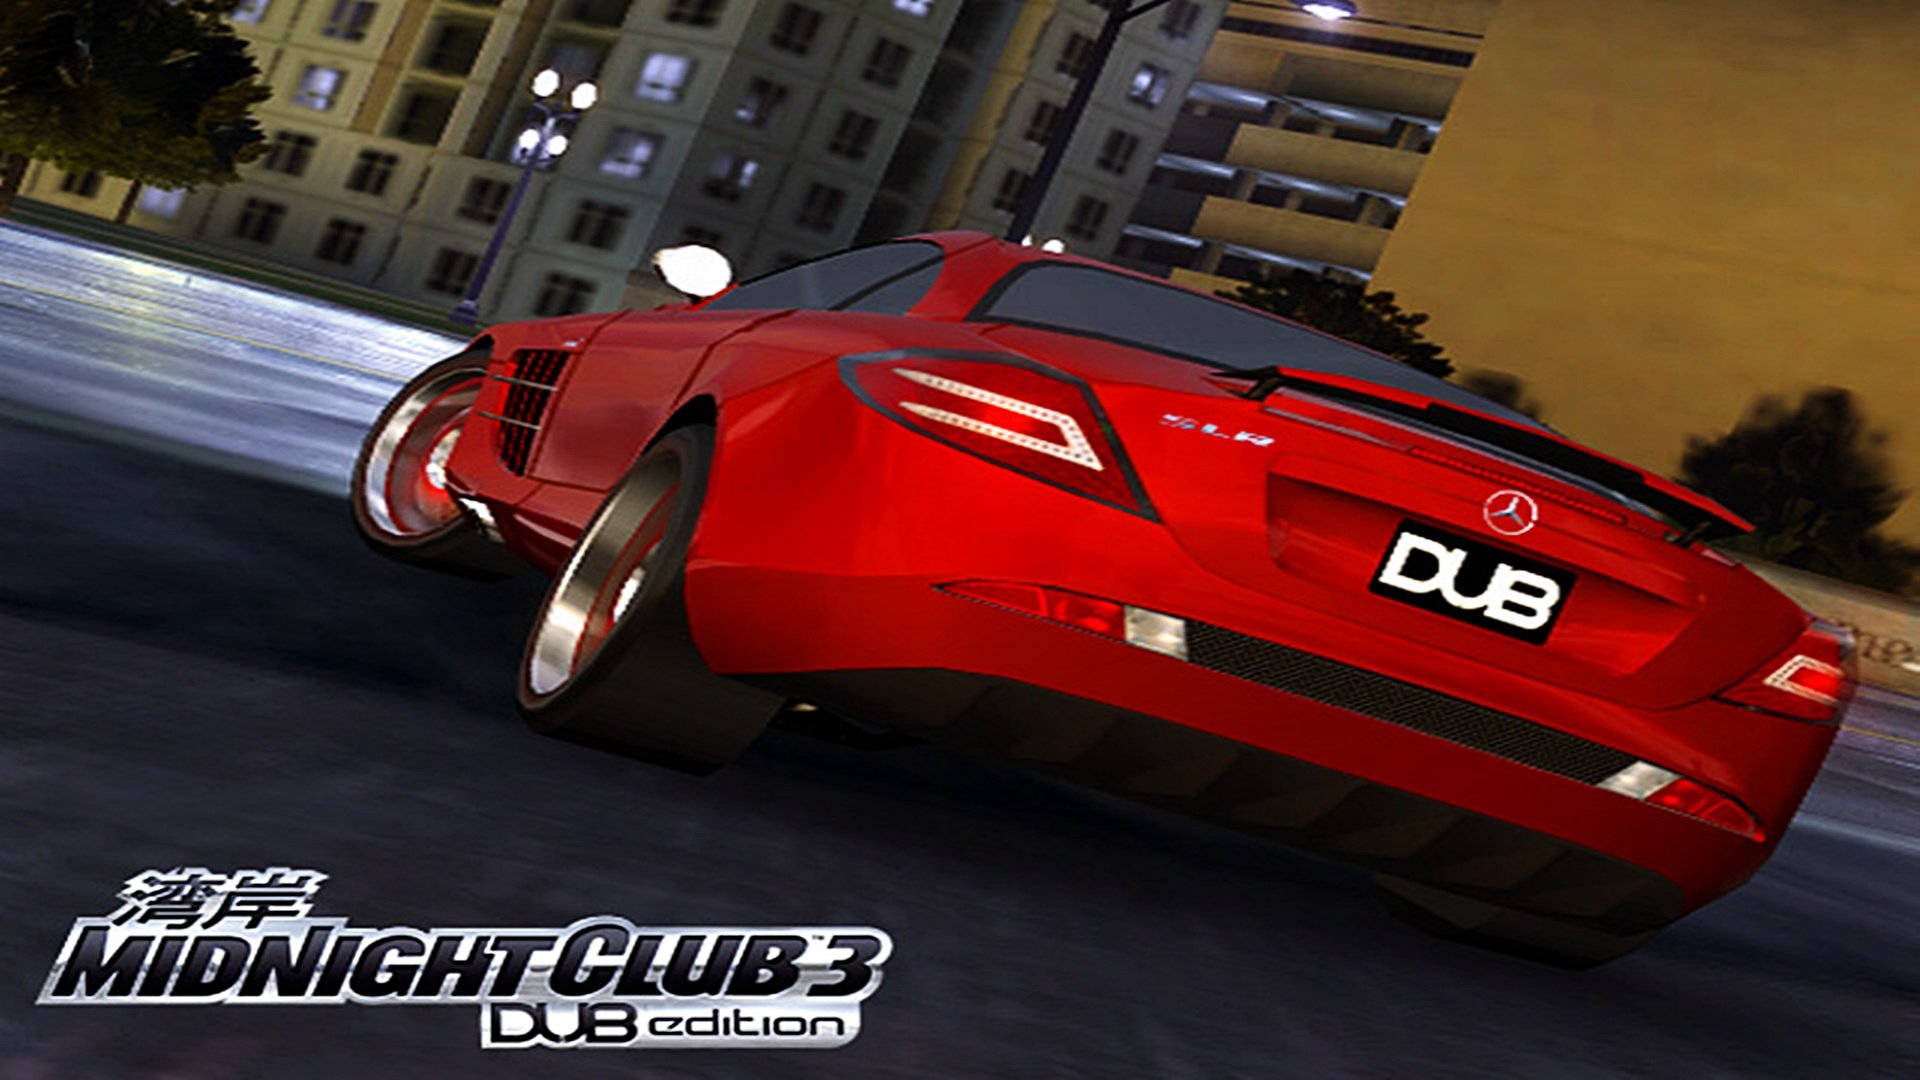 Midnight Club 3 Backgrounds, Compatible - PC, Mobile, Gadgets| 1920x1080 px